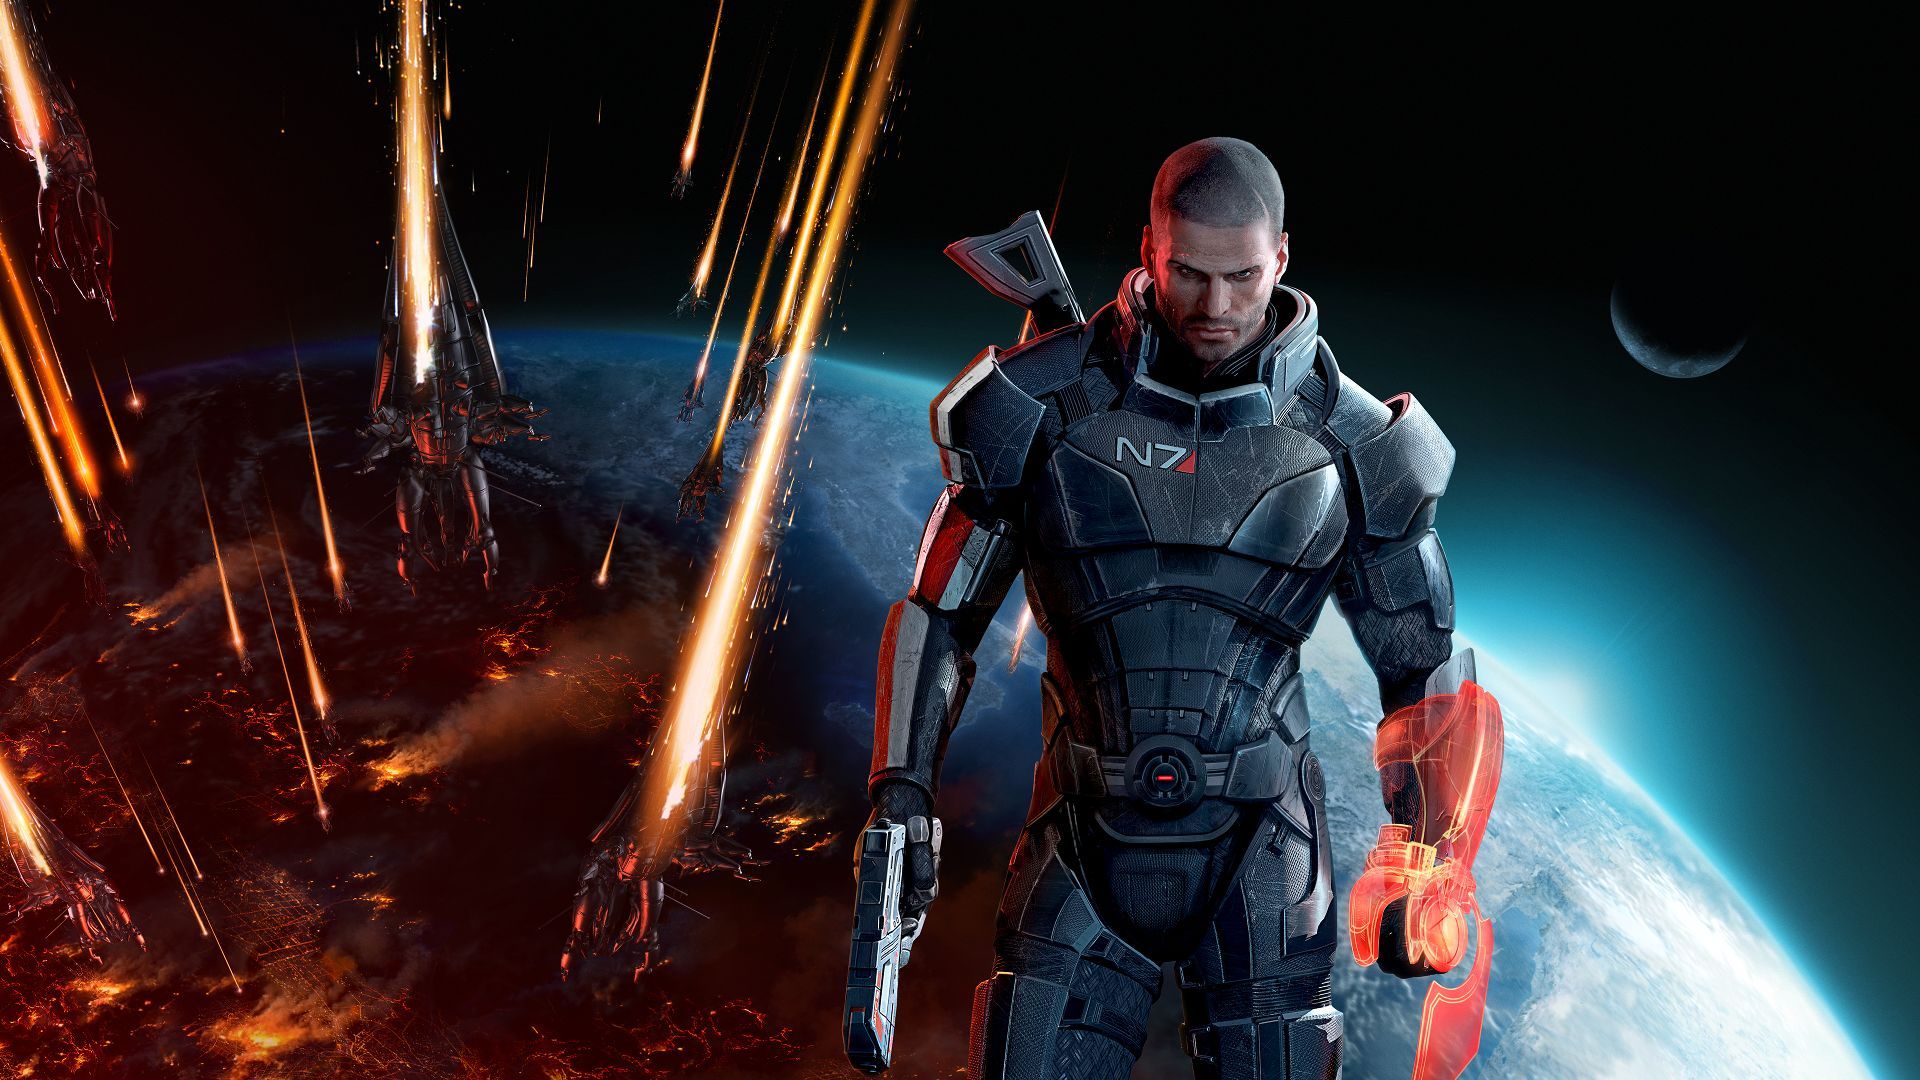 mass effect trilogy xbox one store